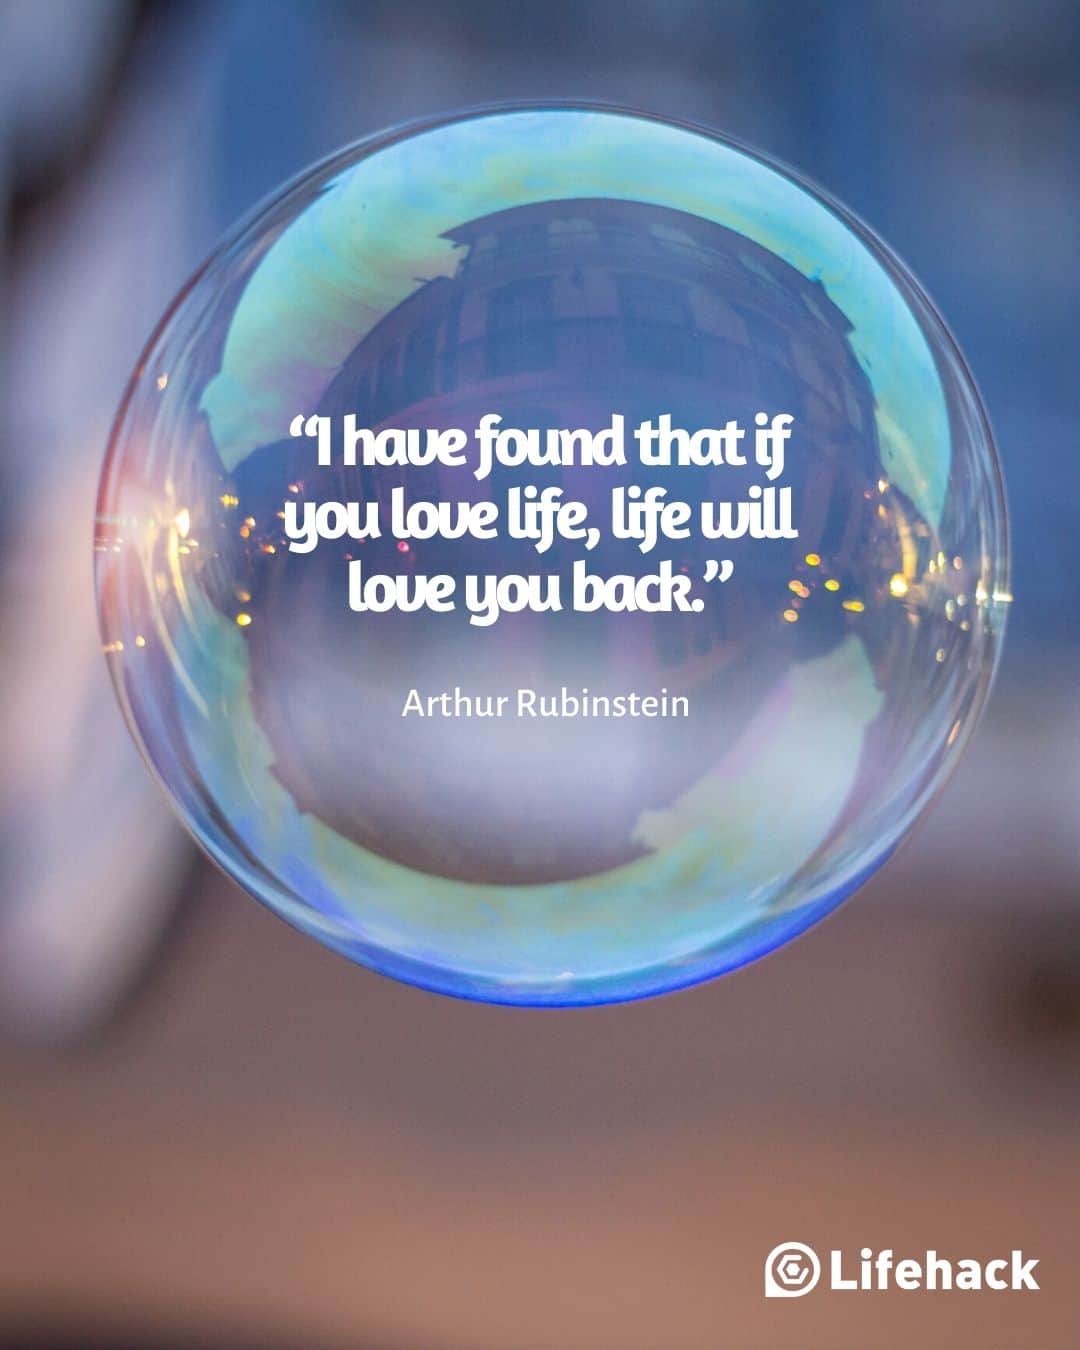 100 Inspirational Quotes That Will Make You Love Life Again